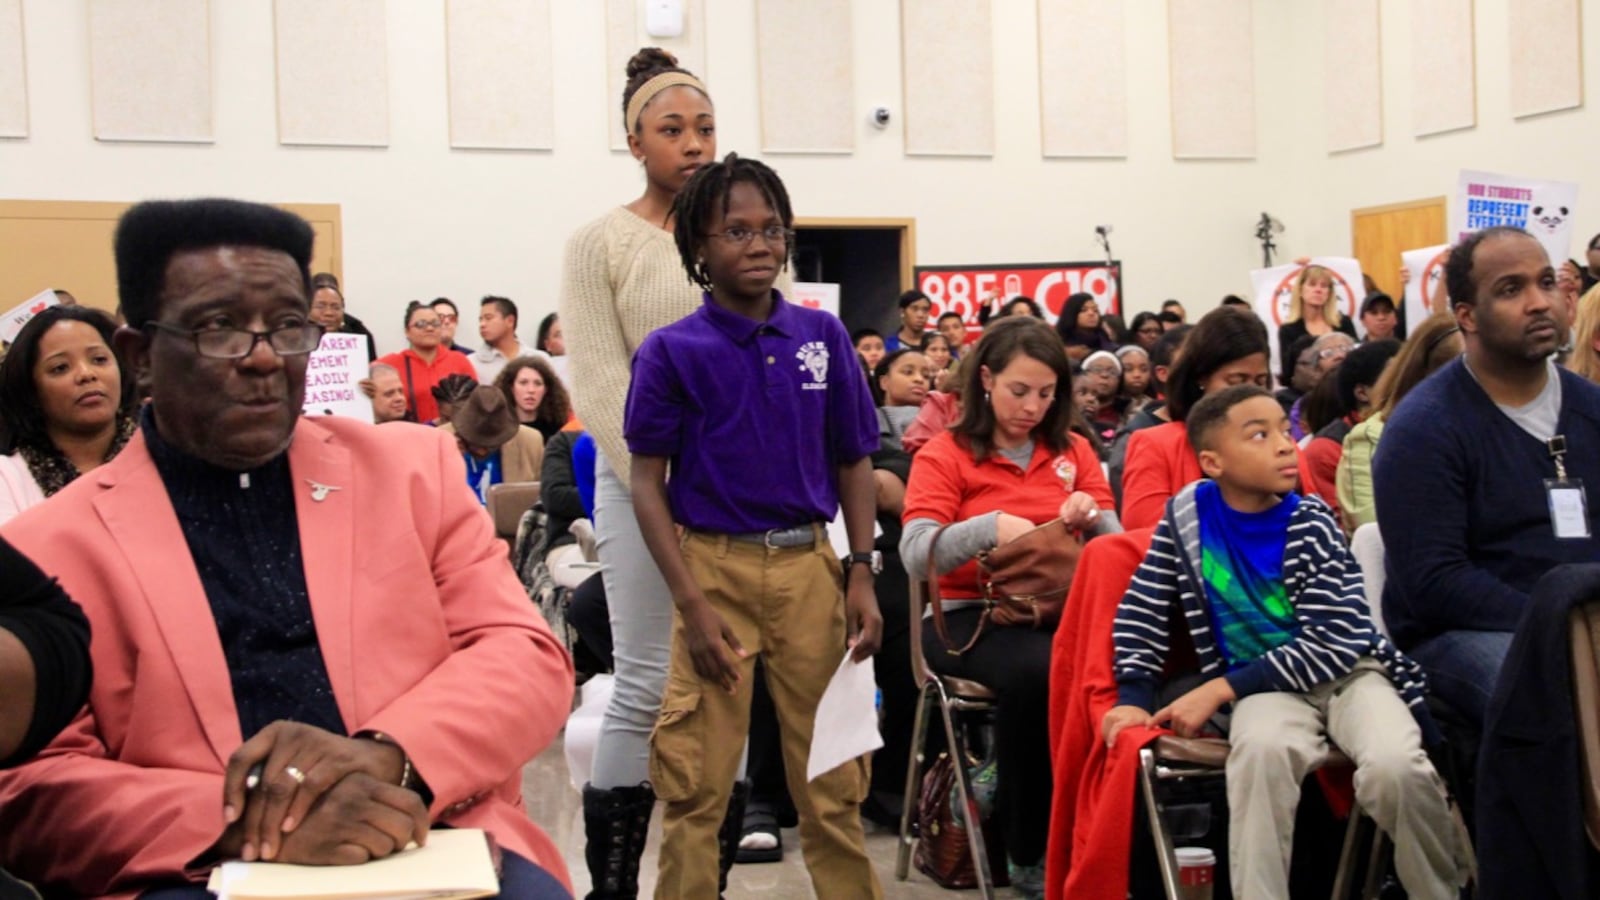 Dunbar Elementary School student Khamaria McElroy stands in line to speak to Shelby County's school board about why her school should stay open.